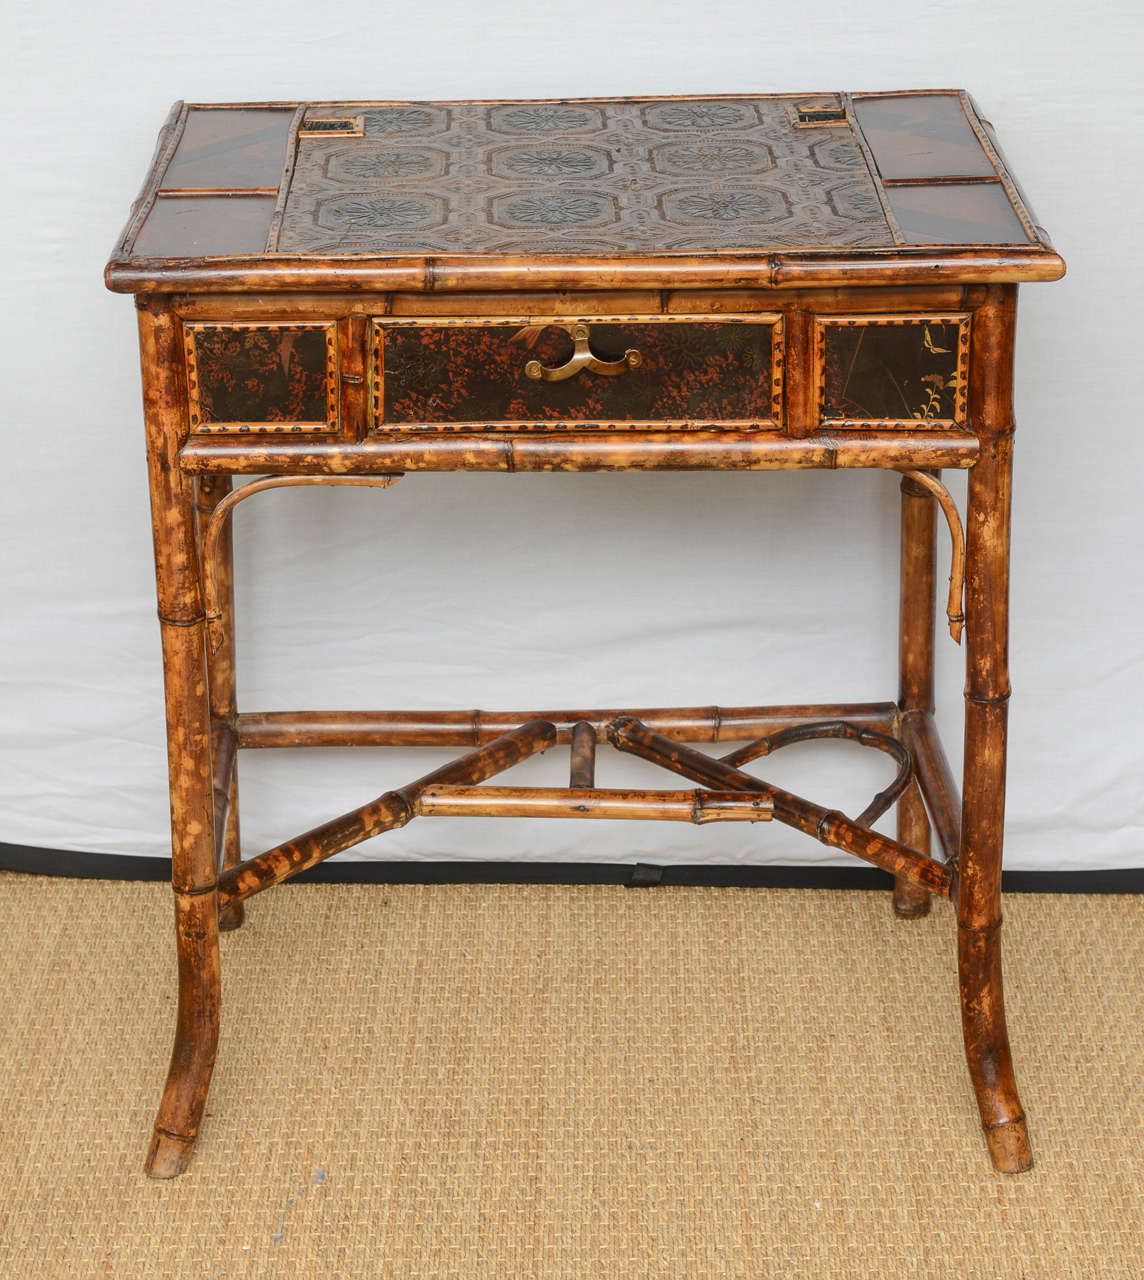 A Victorian English bamboo writing table with inkwells and leather paper on top (all original).